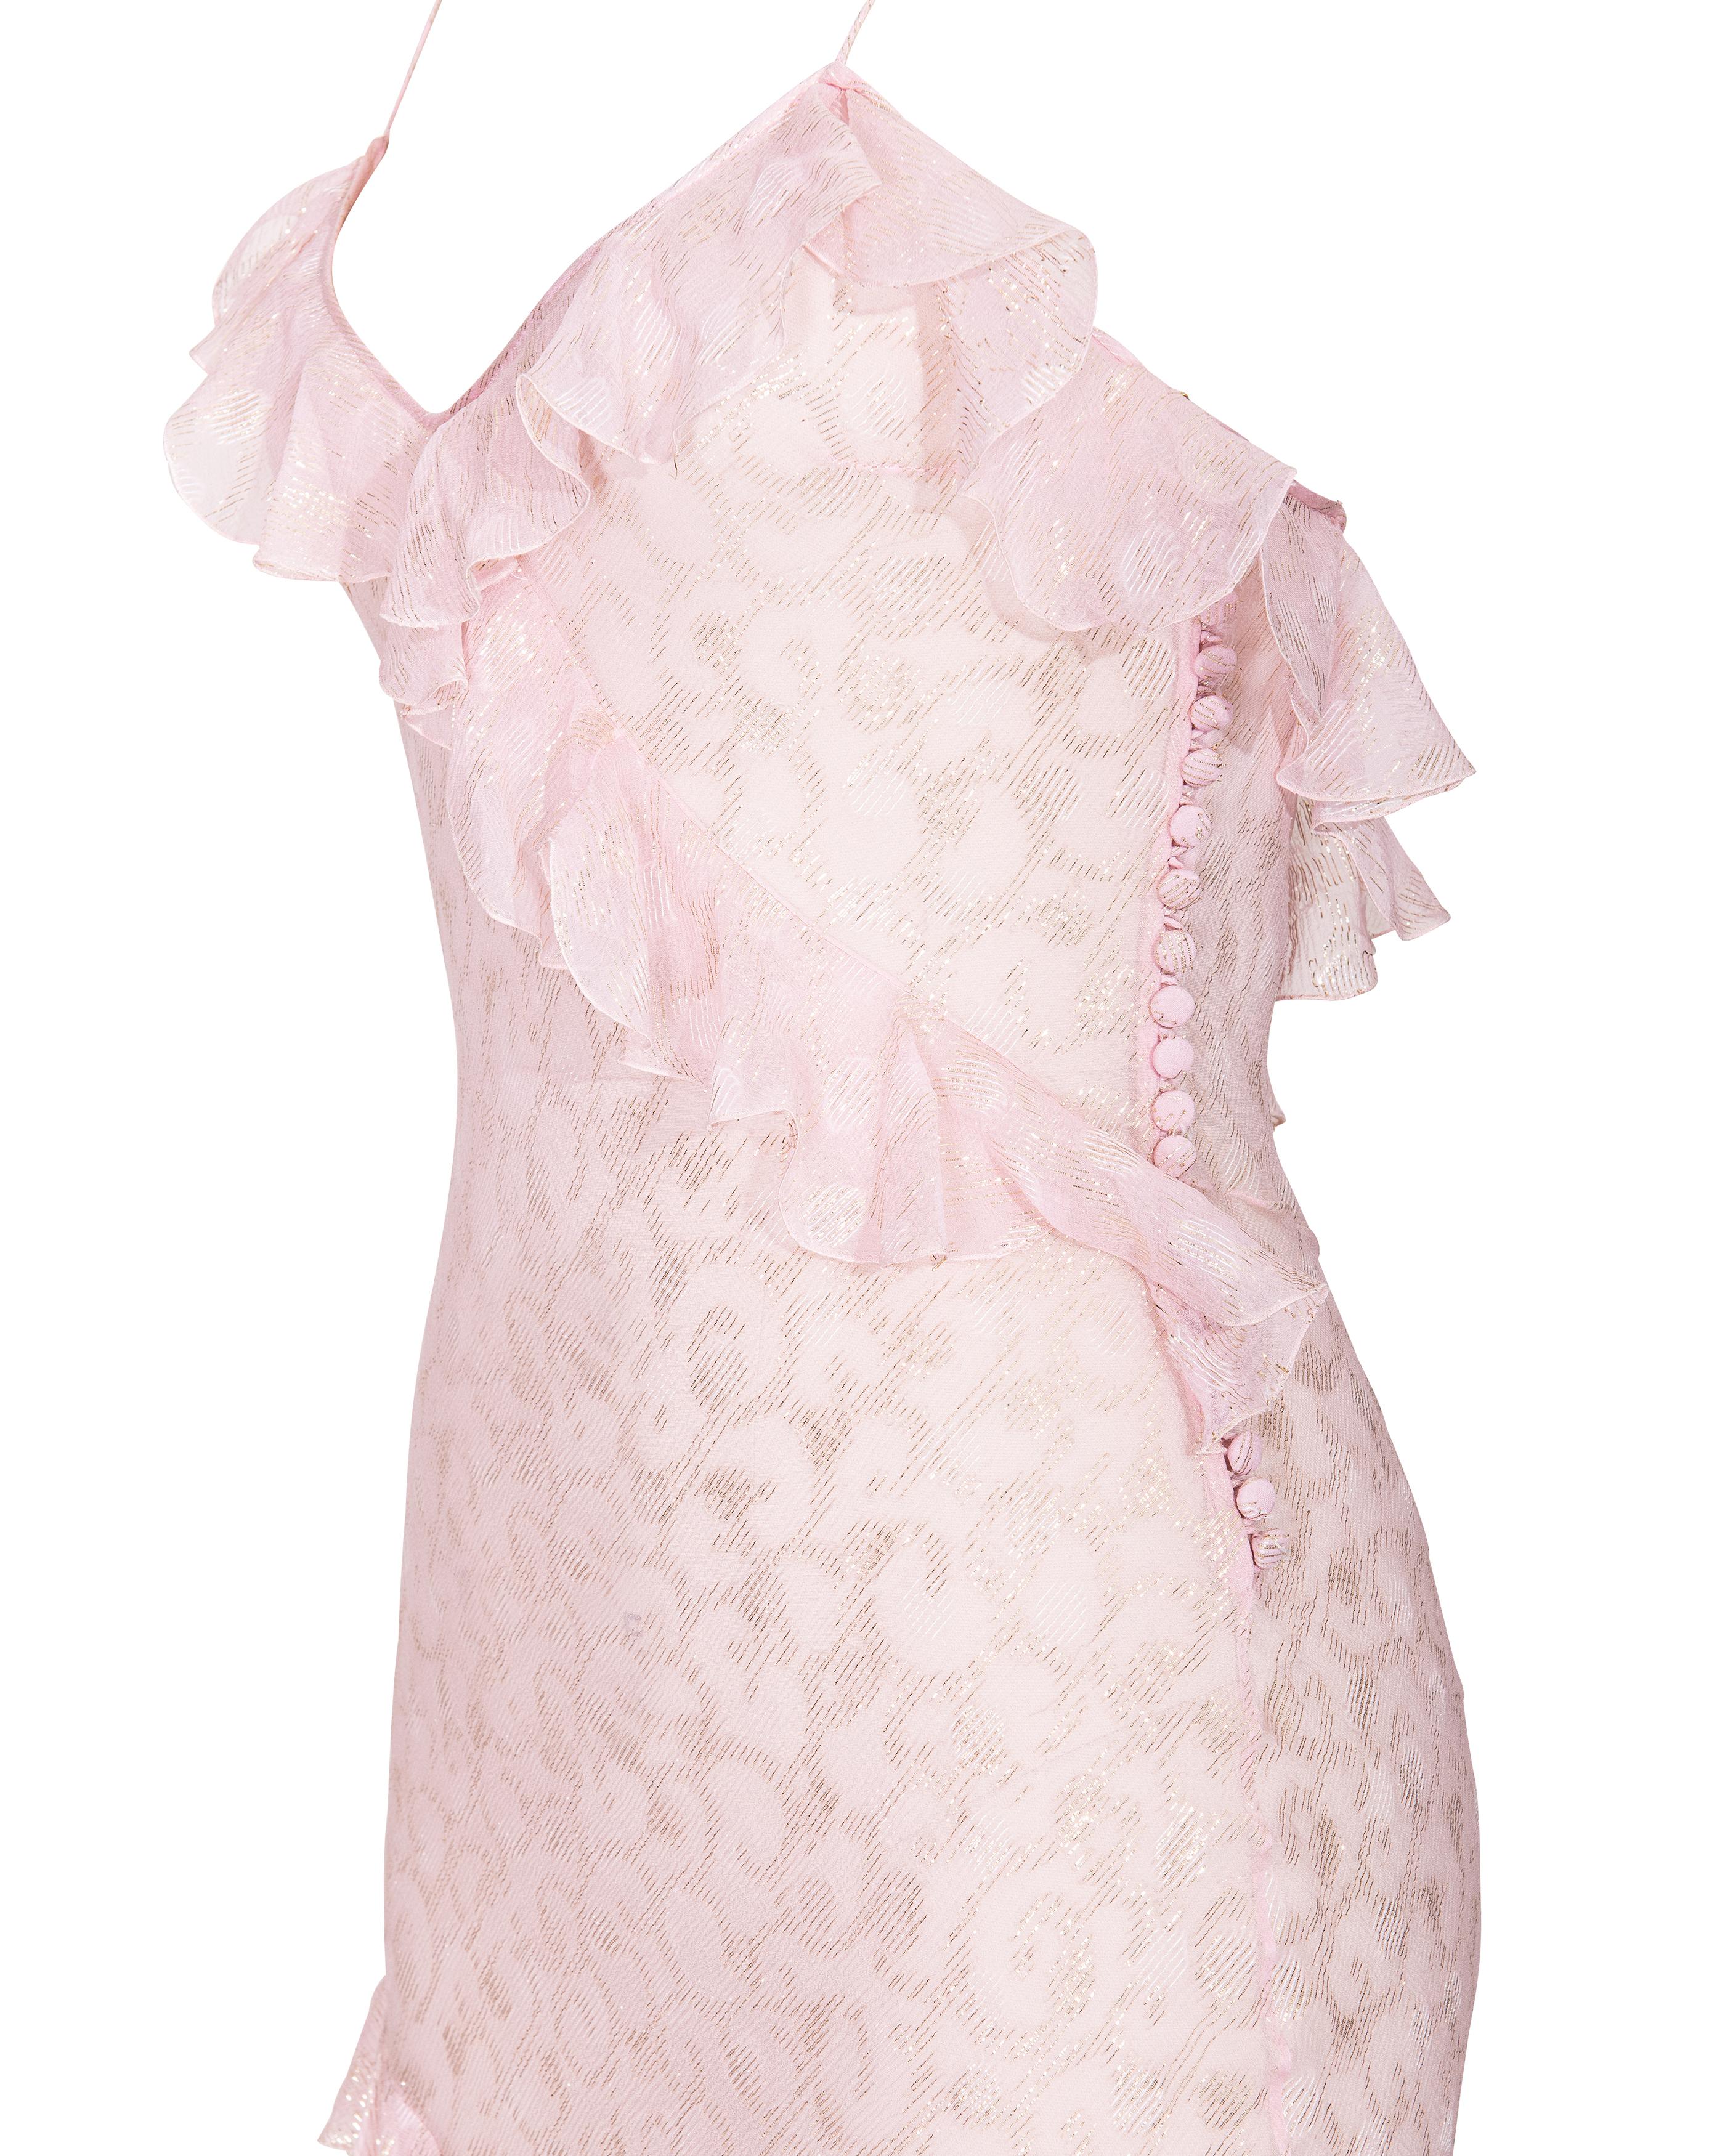 S/S 2004 Christian Dior by John Galliano Sheer Pink and Gold Ruffle Gown 5